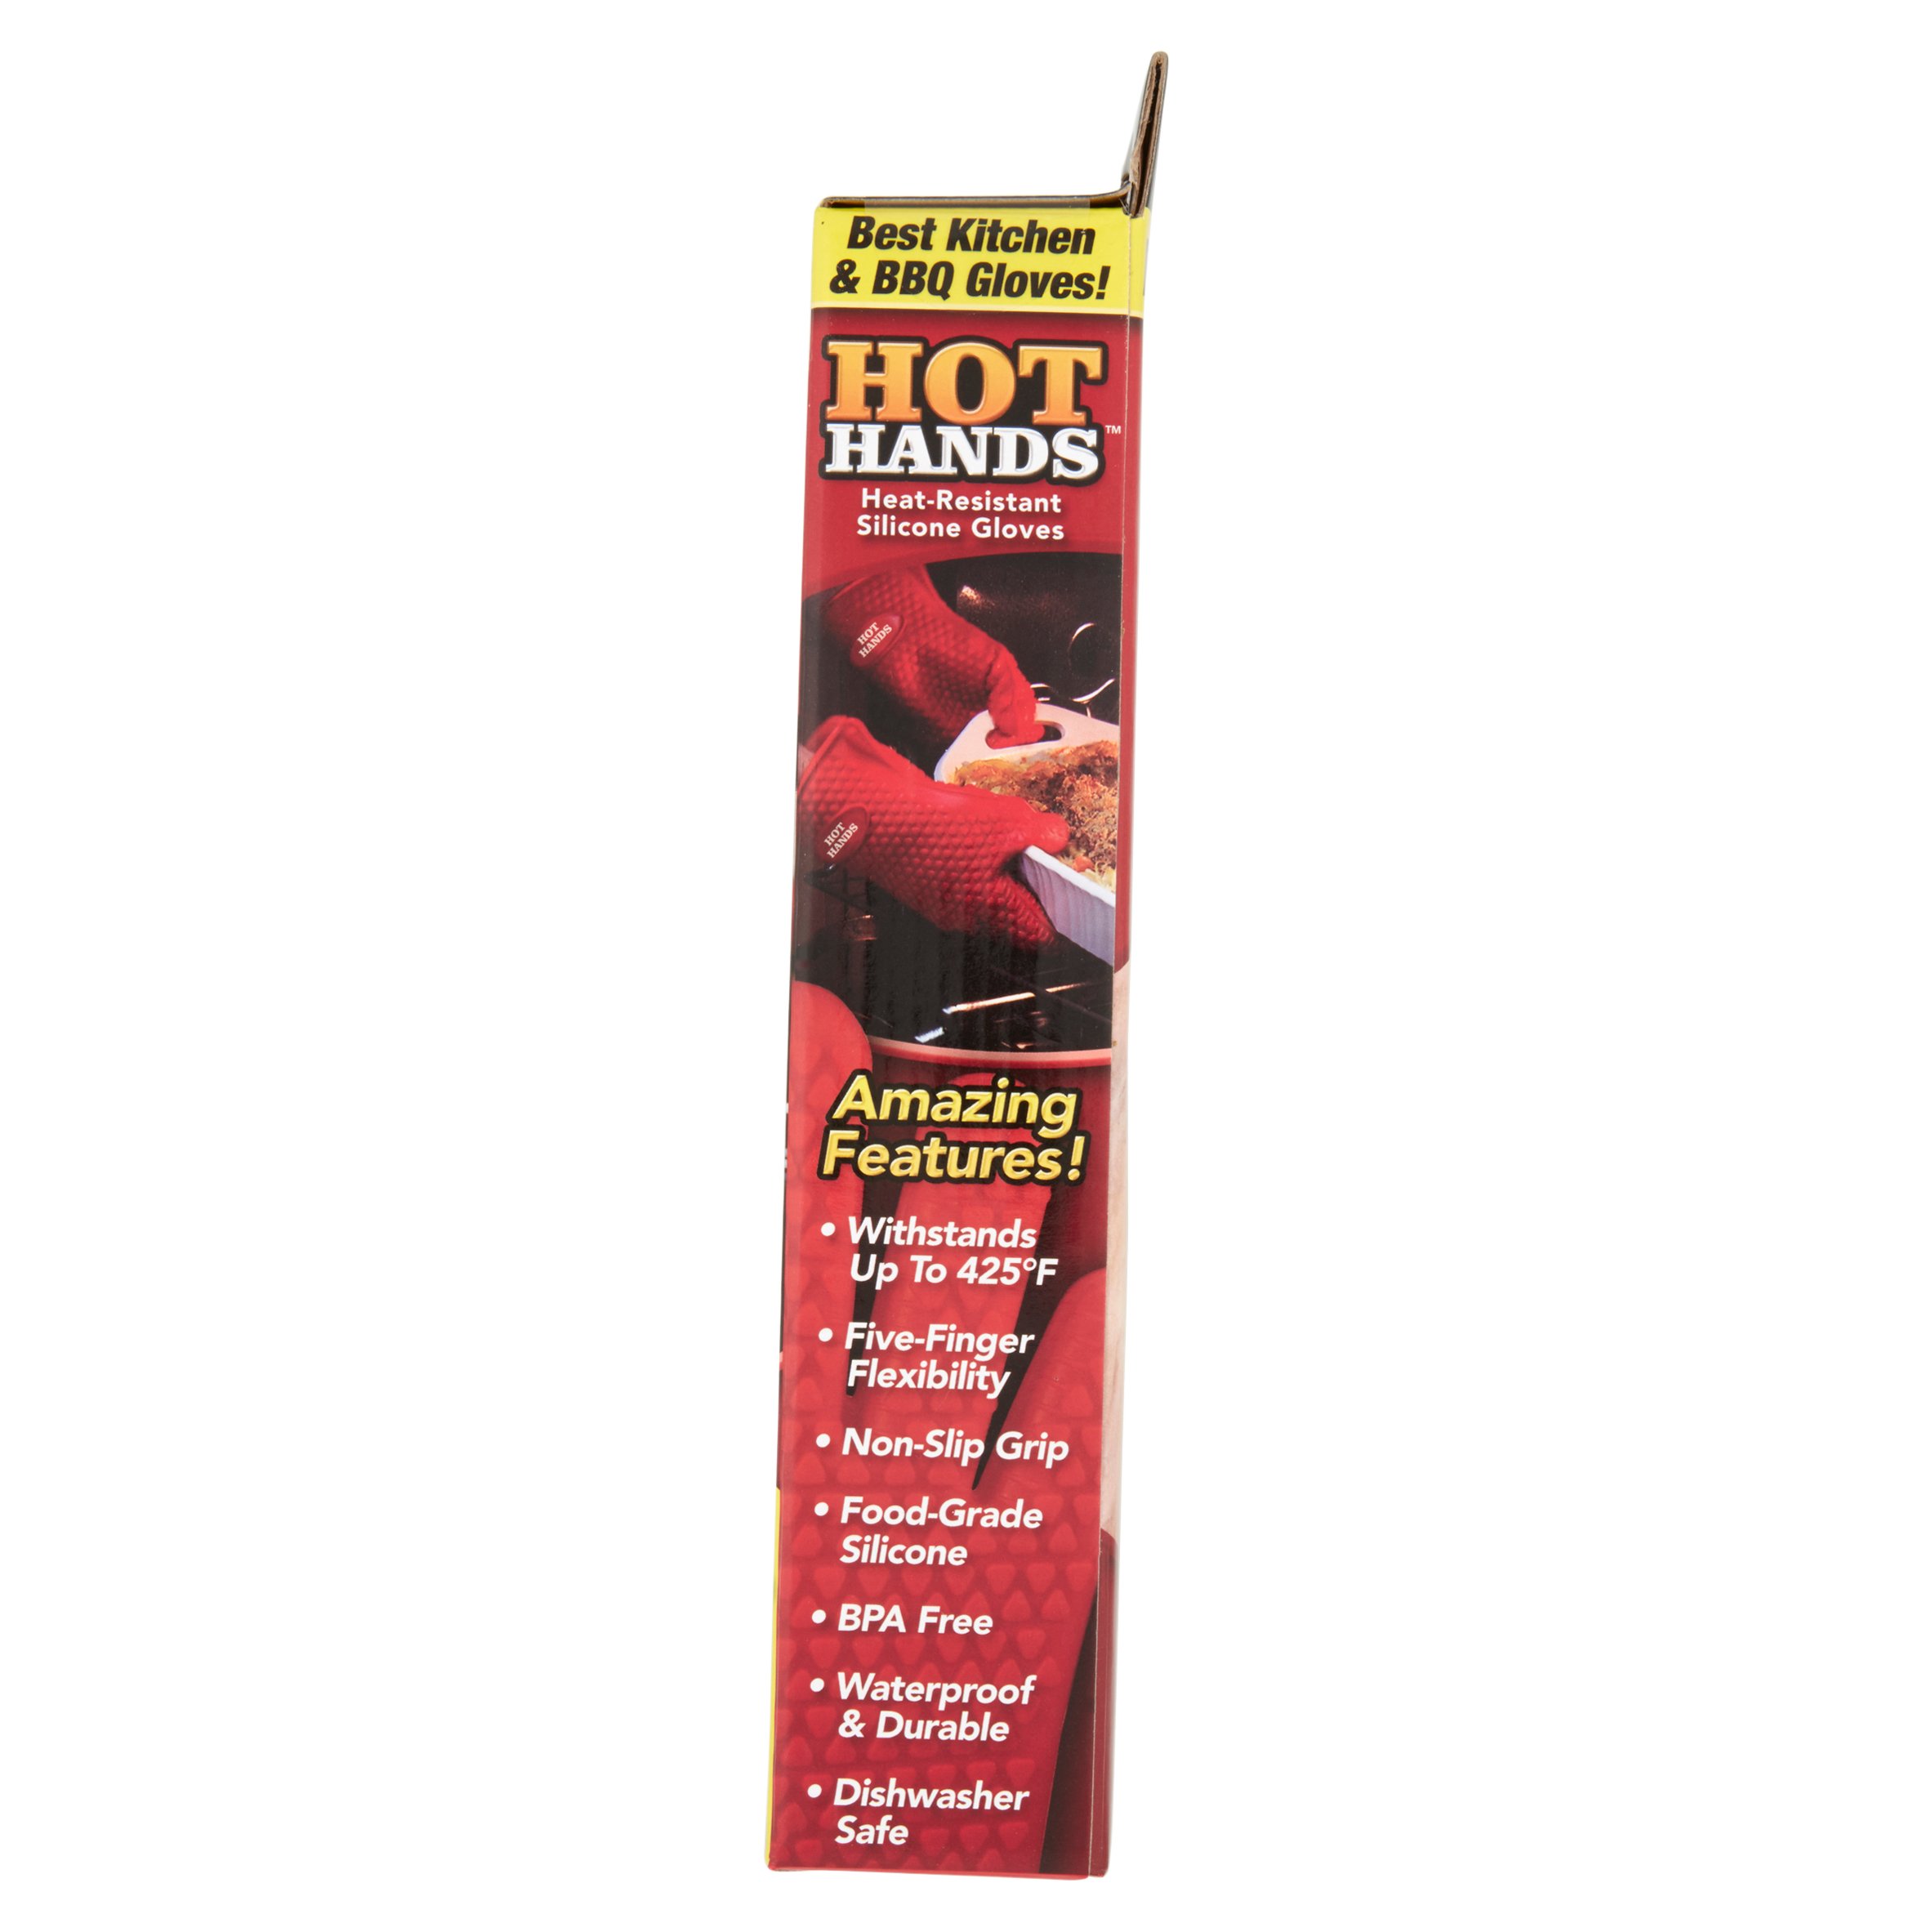 Hot Hands Heat-Resistant Silicone Gloves - image 5 of 5